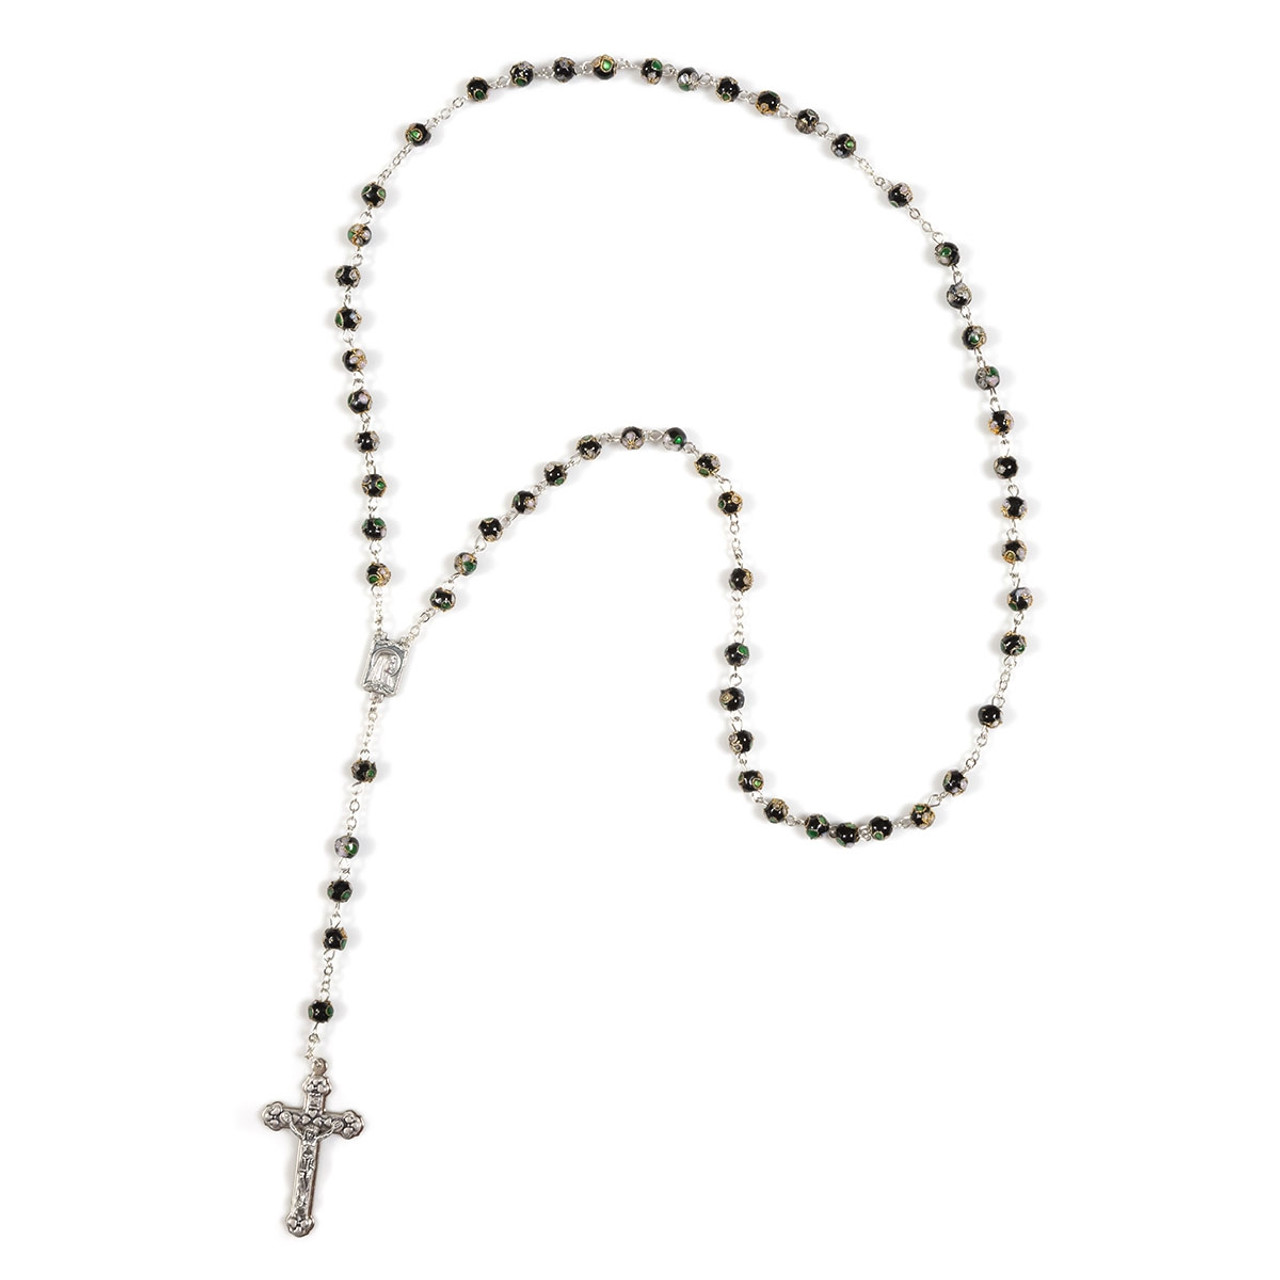 Black Cloisonne Bead Rosary | Westminster Abbey Shop